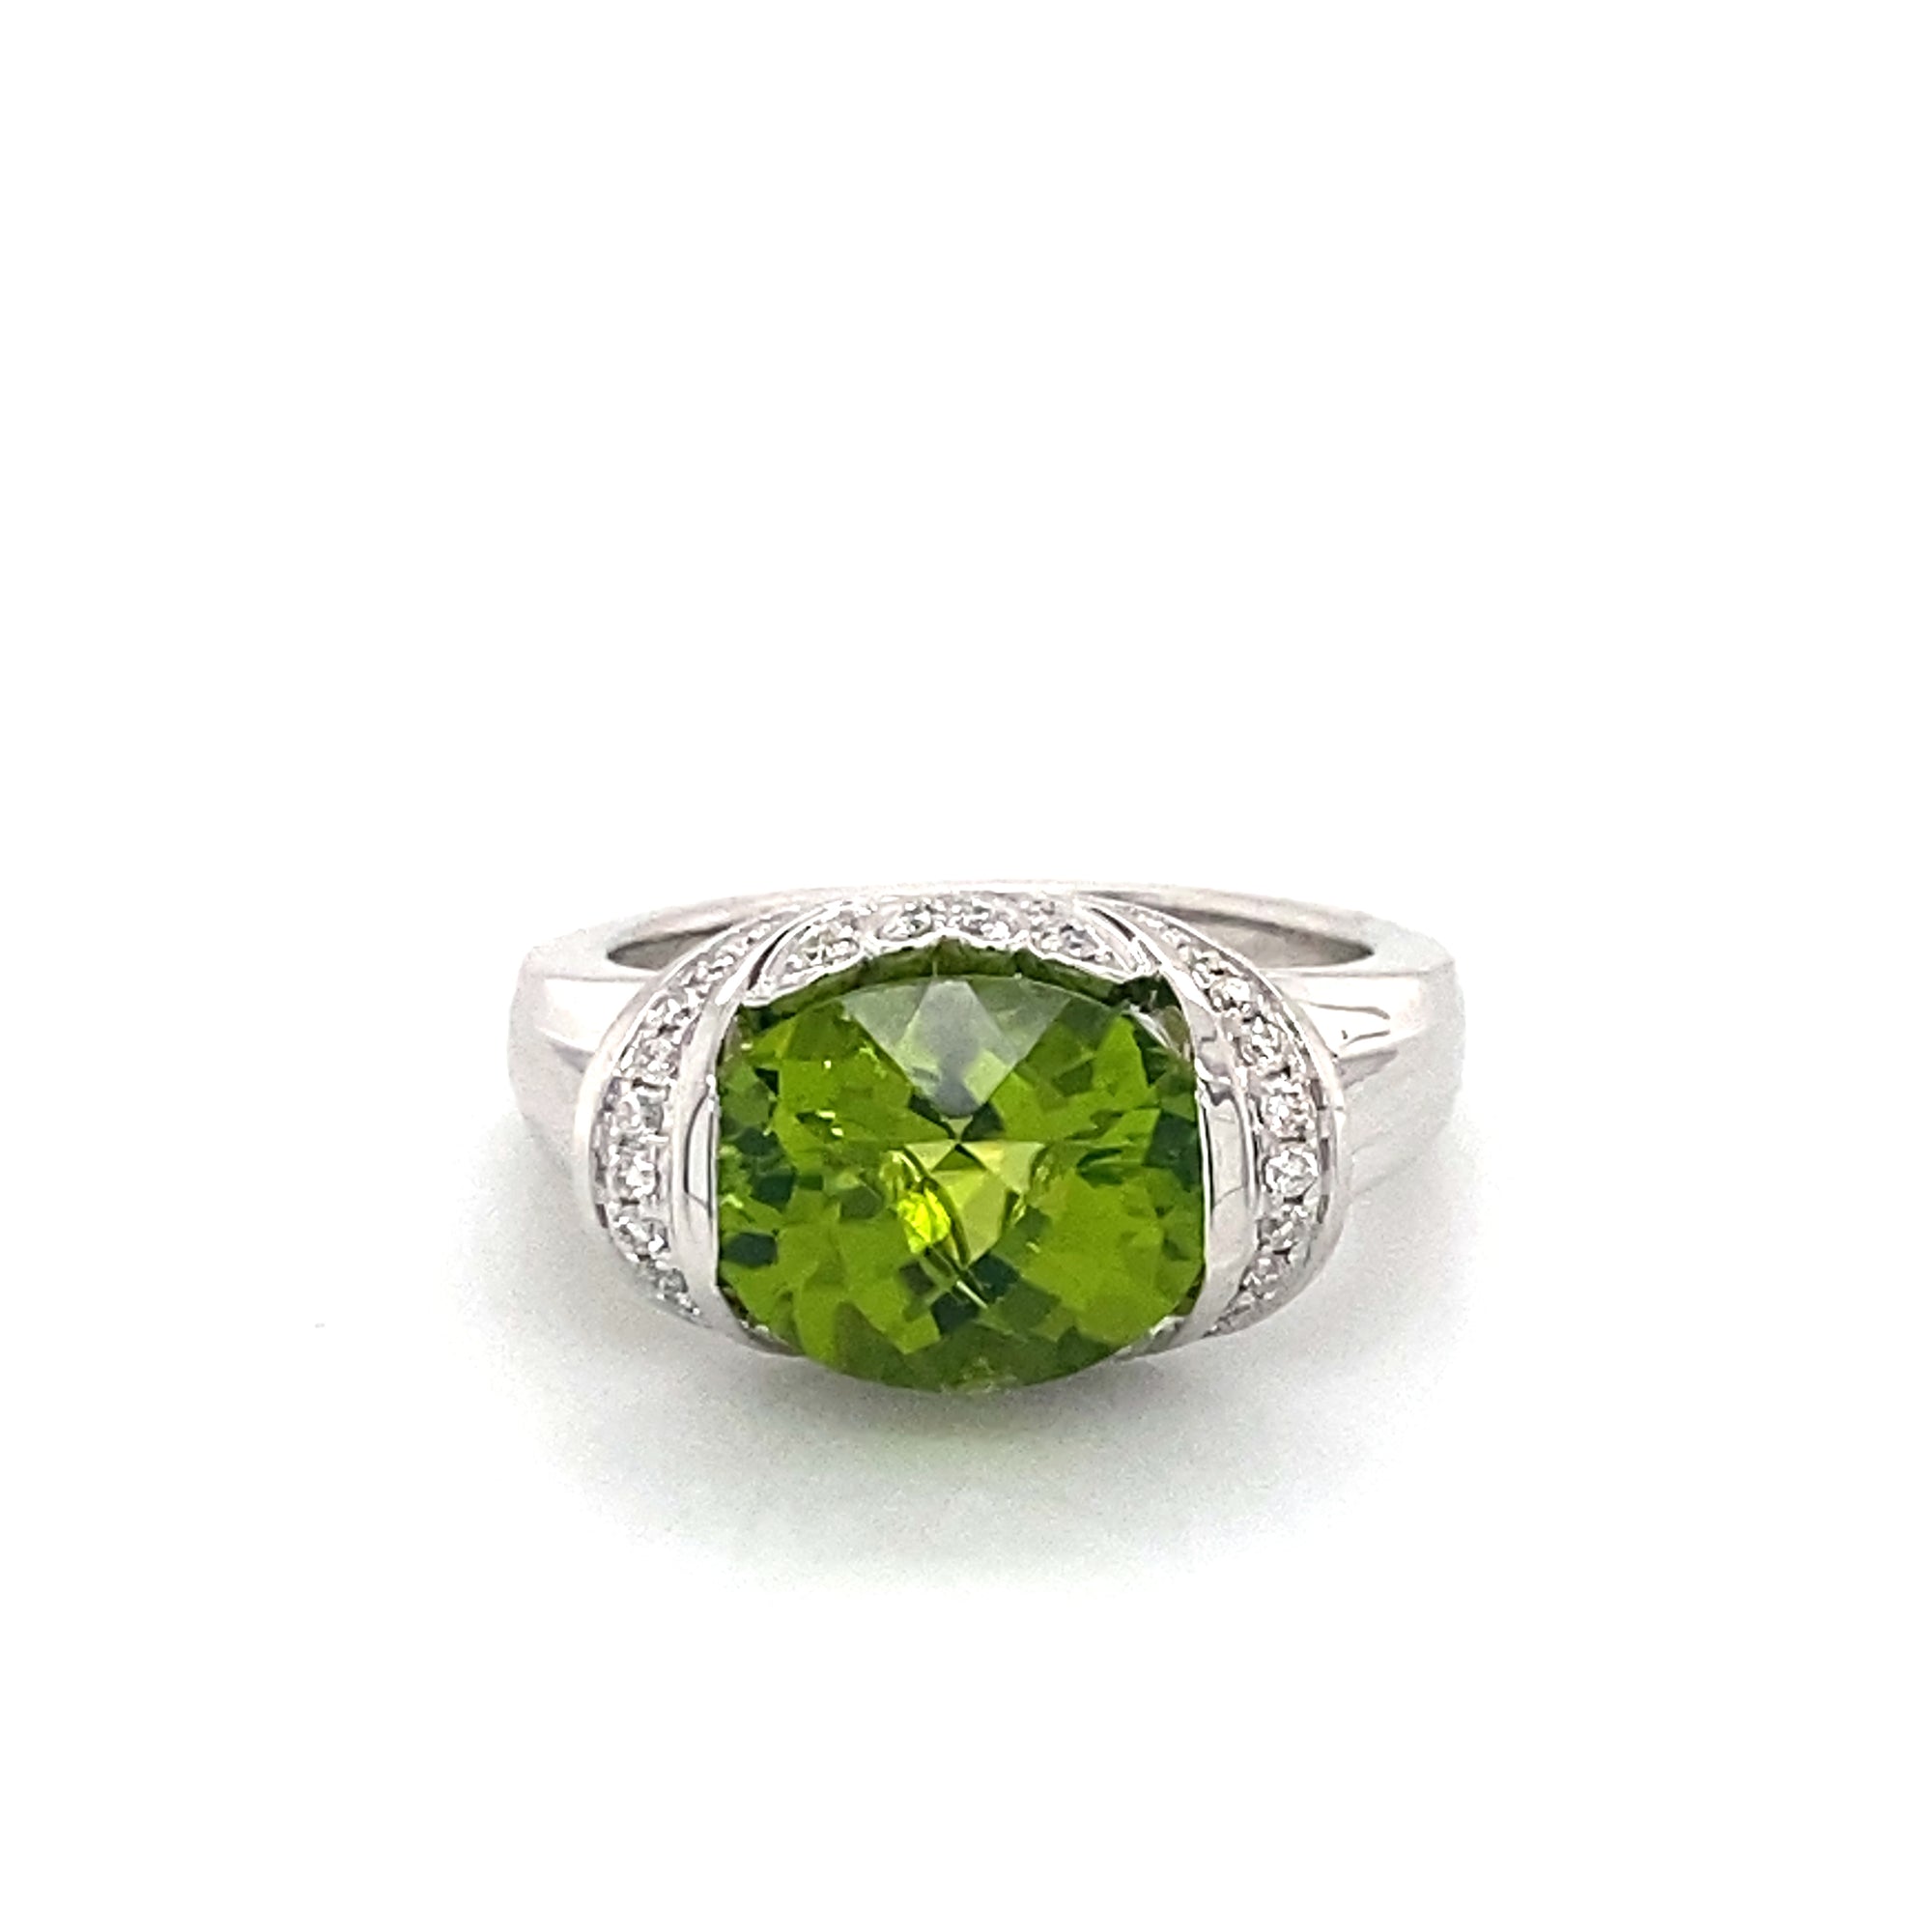 14K White Gold Oval Peridot Ring with Surrounding Diamond Accents